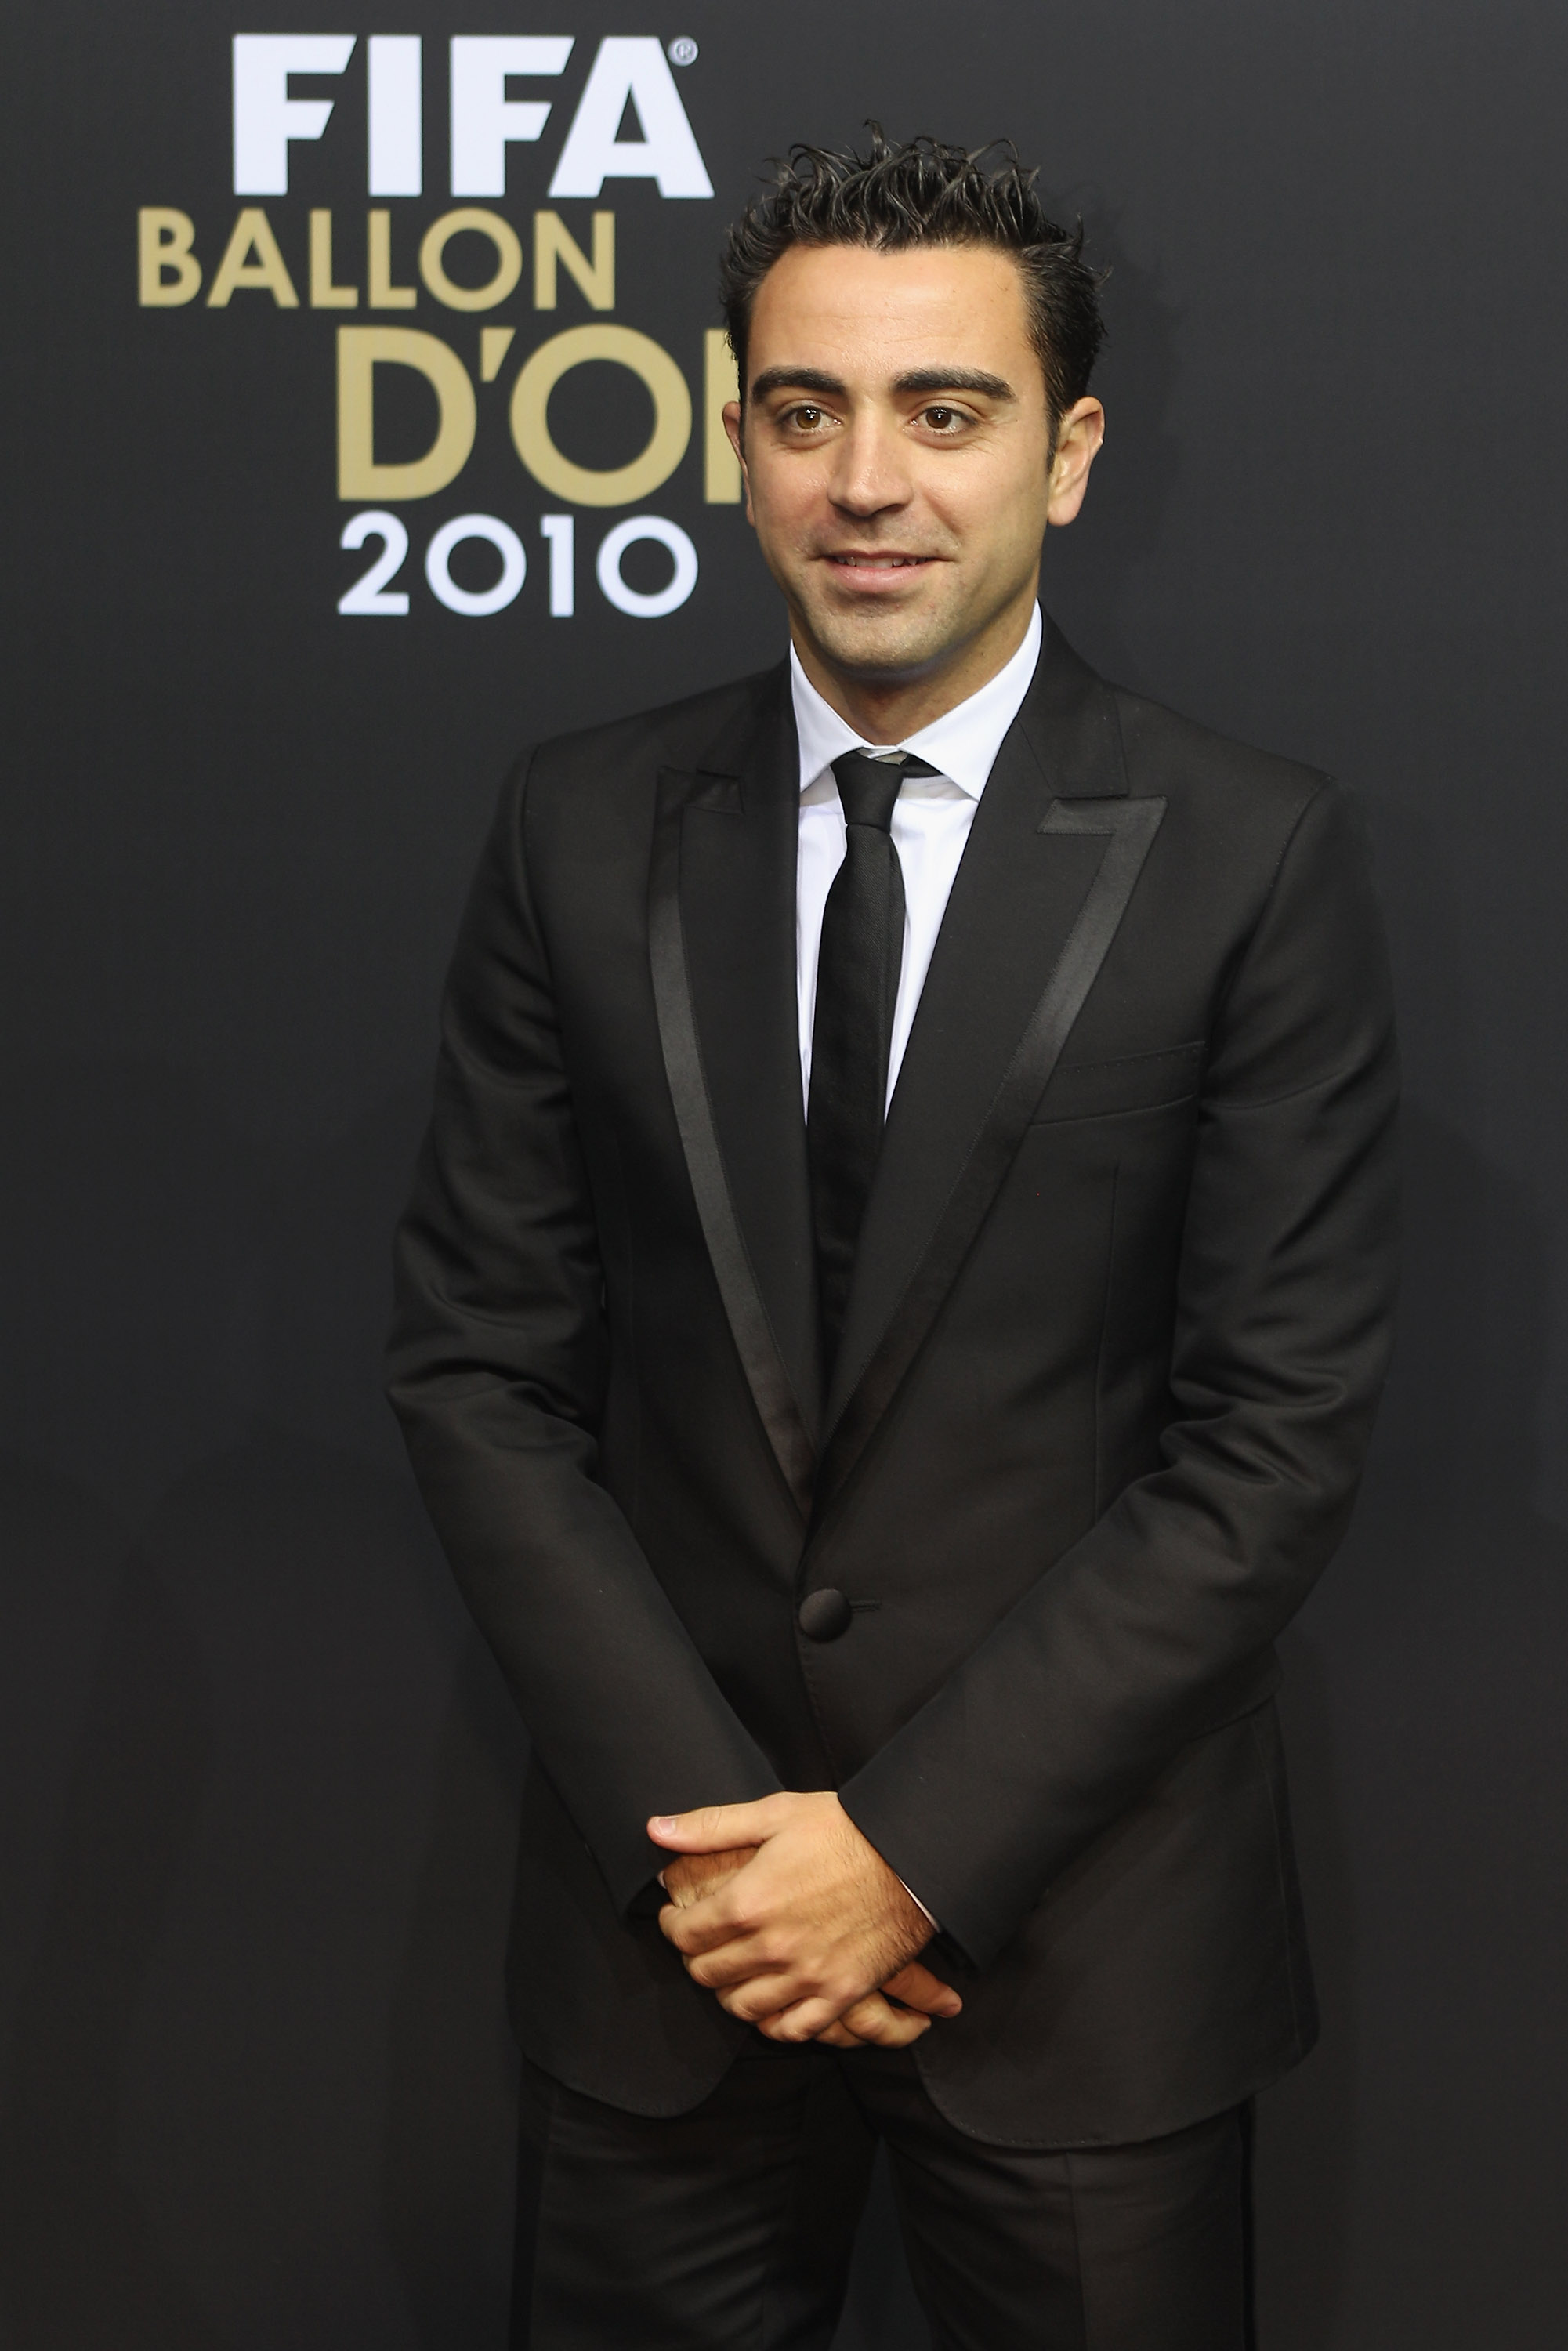 ZURICH, SWITZERLAND - JANUARY 10: Xavi of Spain arrives at the FIFA Ballon d'or Gala at the Zurich Kongresshaus on January 10, 2011 in Zurich, Switzerland.  (Photo by Michael Steele/ Getty Images)